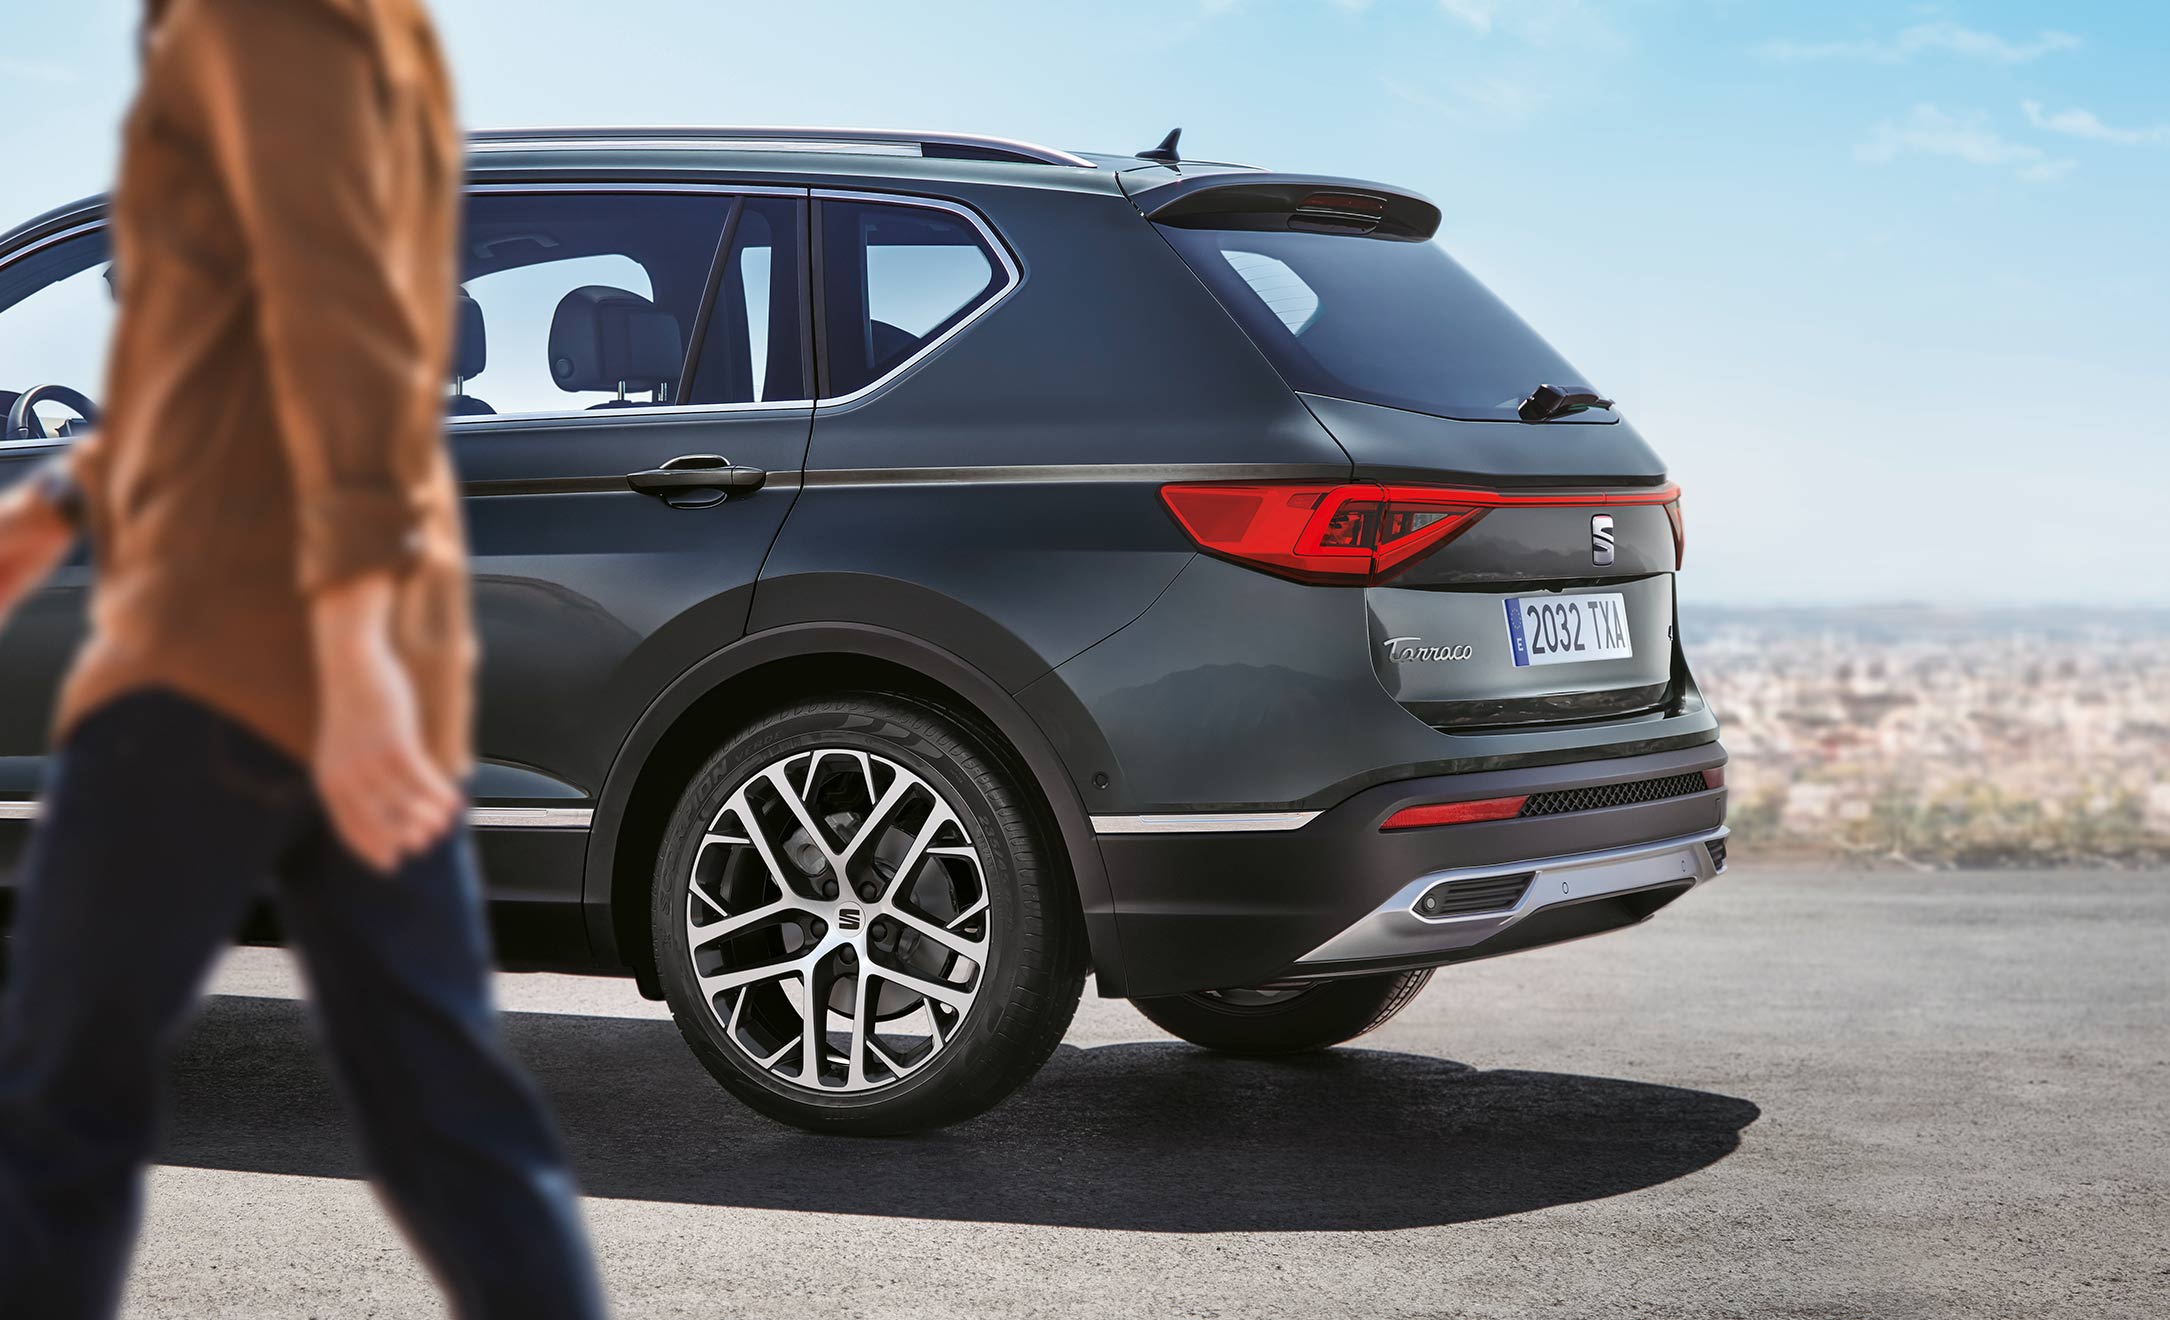 SEAT Tarraco safety feature will automatically call emergency services if an accident occurs